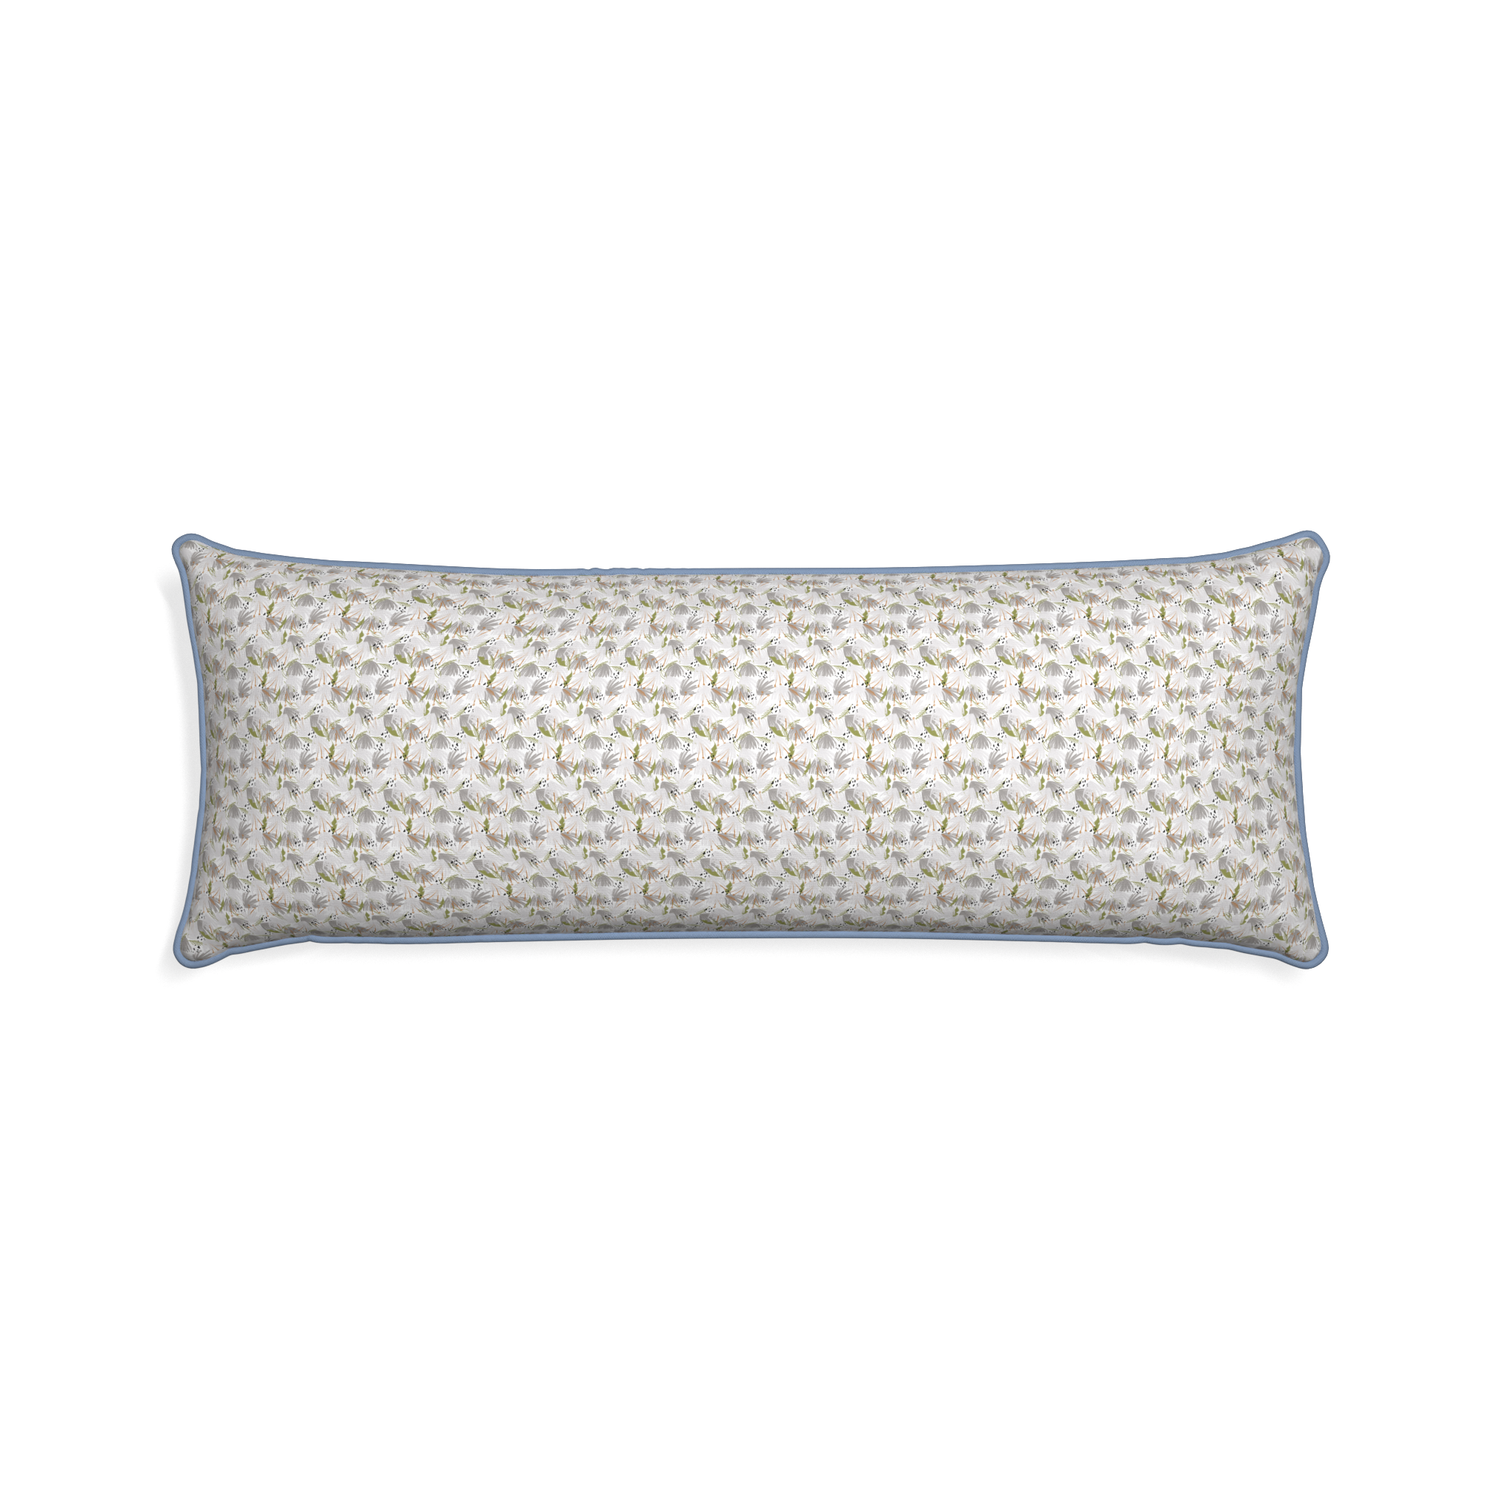 Xl-lumbar eden grey custom grey floralpillow with sky piping on white background